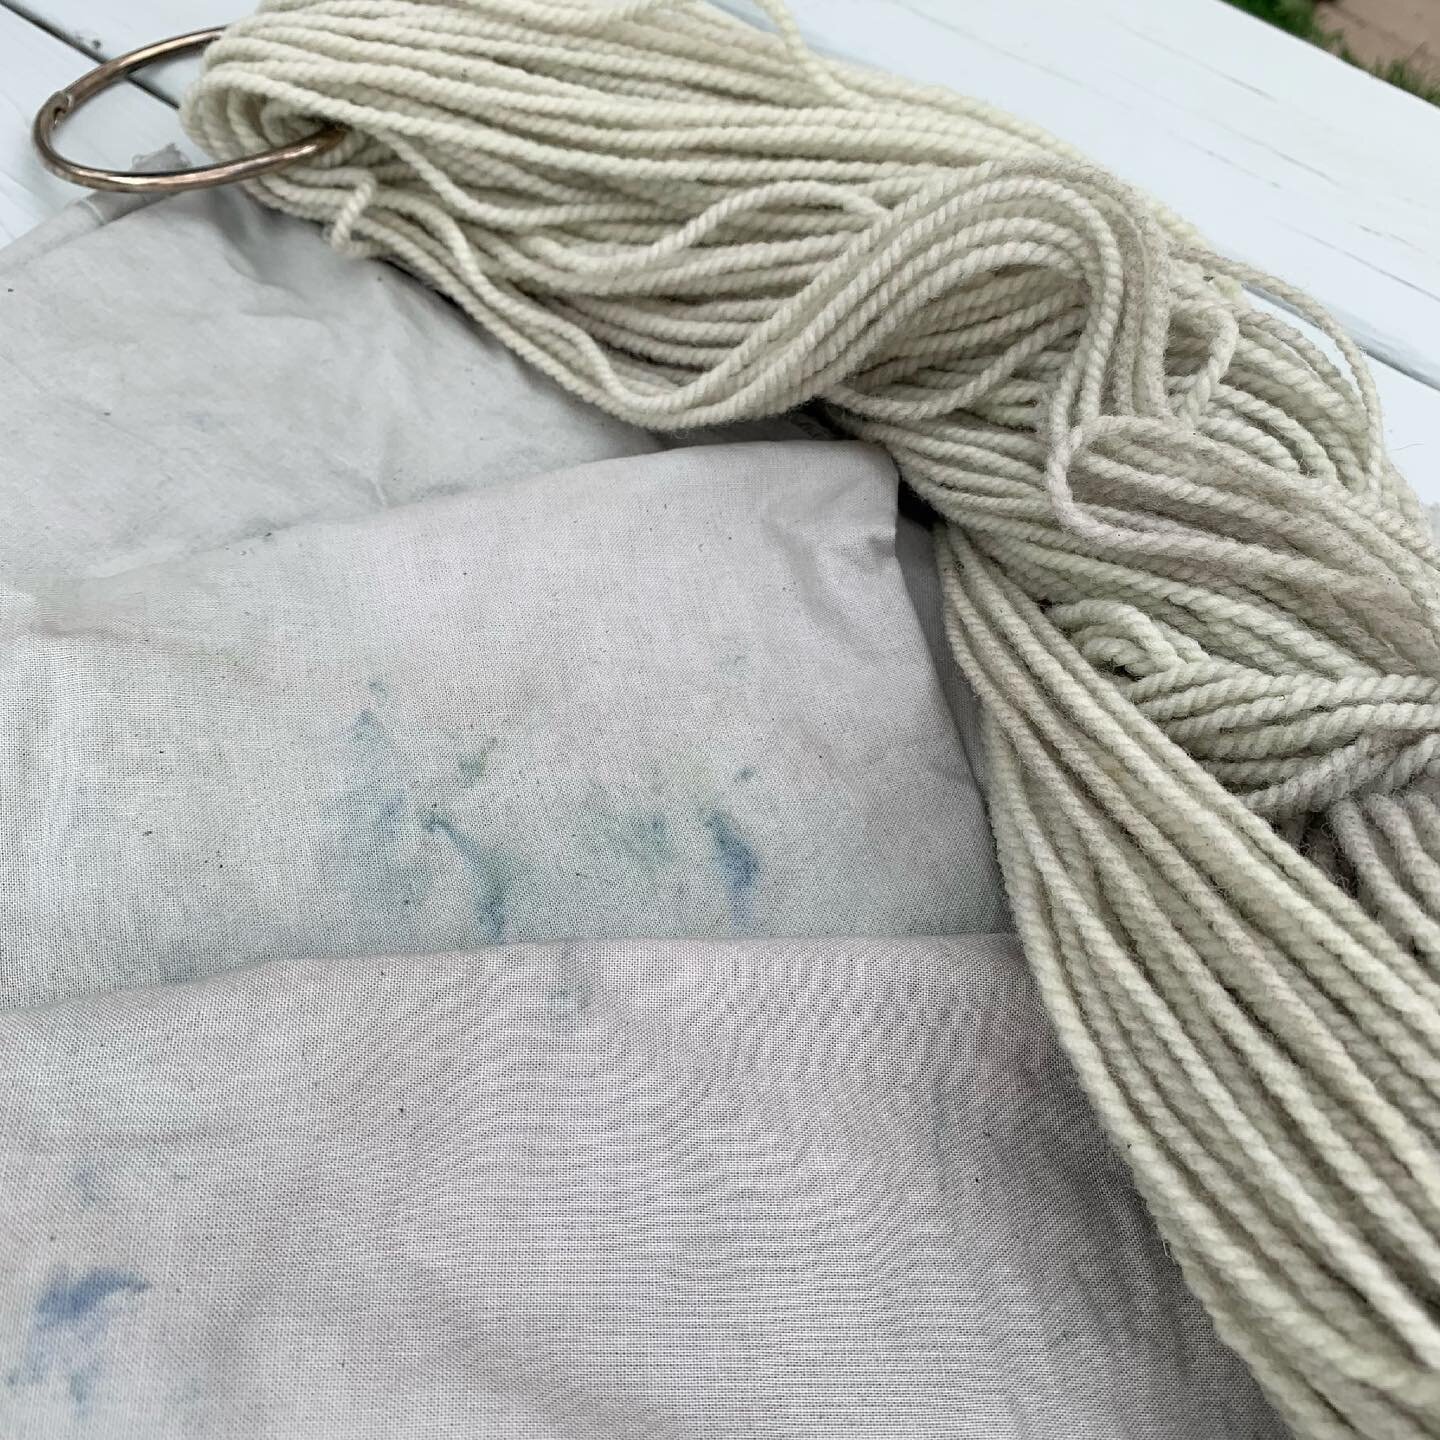 Can&rsquo;t seem to capture the beautiful tint of green on these hollyhock dyed pieces. But what a treat to explore! Love the blue spots on the fabric where the flower petal snuggled up against it. Cheers to uneven dyeing! 💙 Much love to @vegejan fo